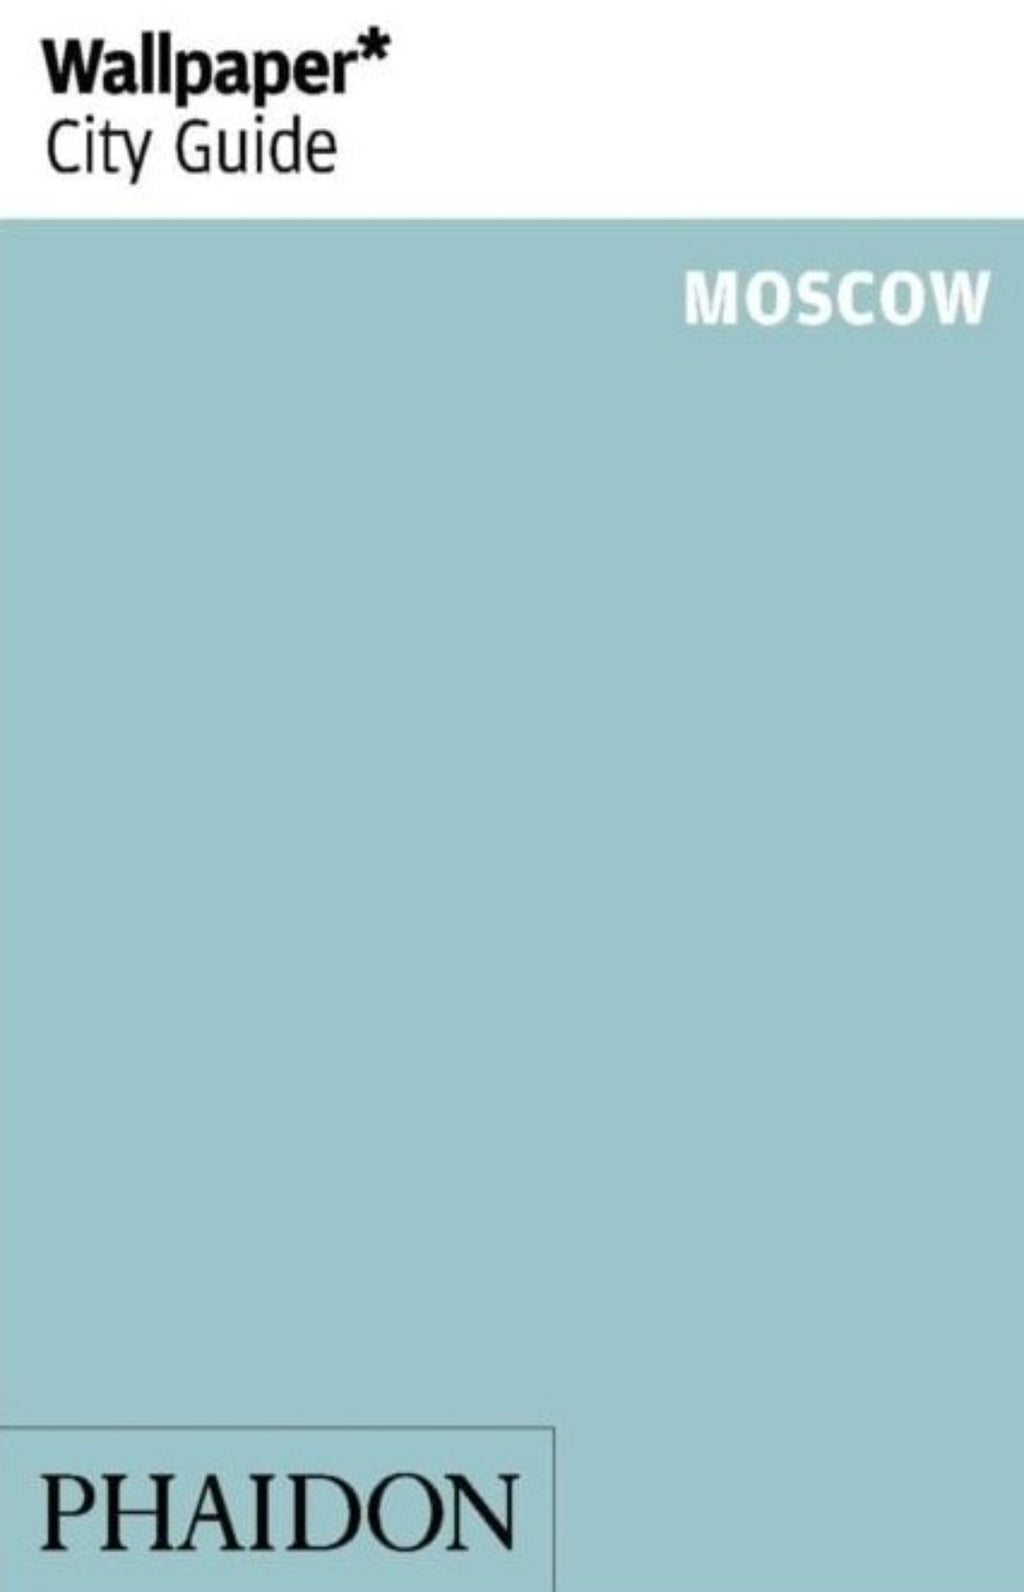 Wallpaper* City Guide - Moscow